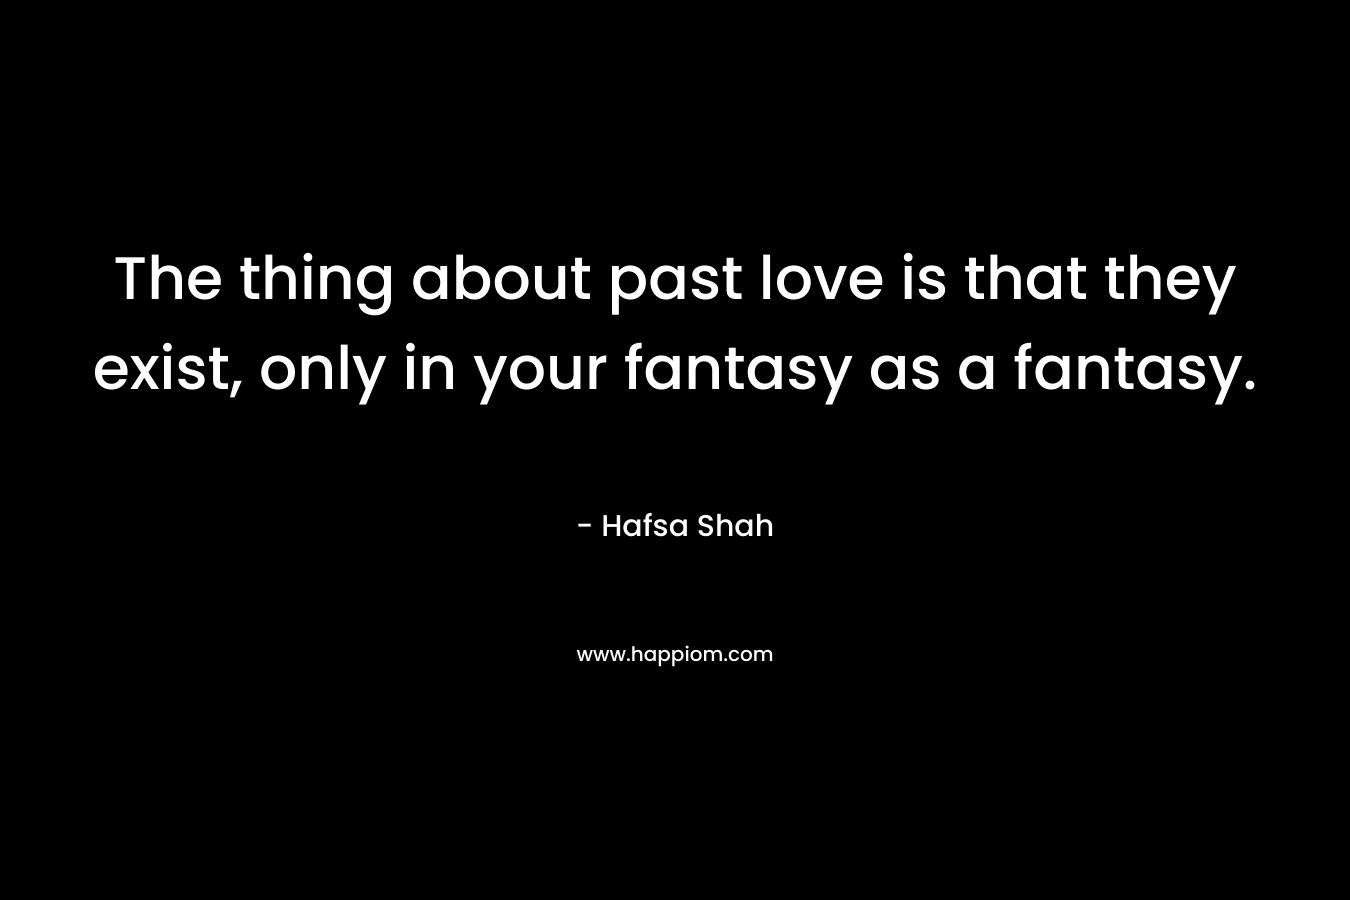 The thing about past love is that they exist, only in your fantasy as a fantasy.